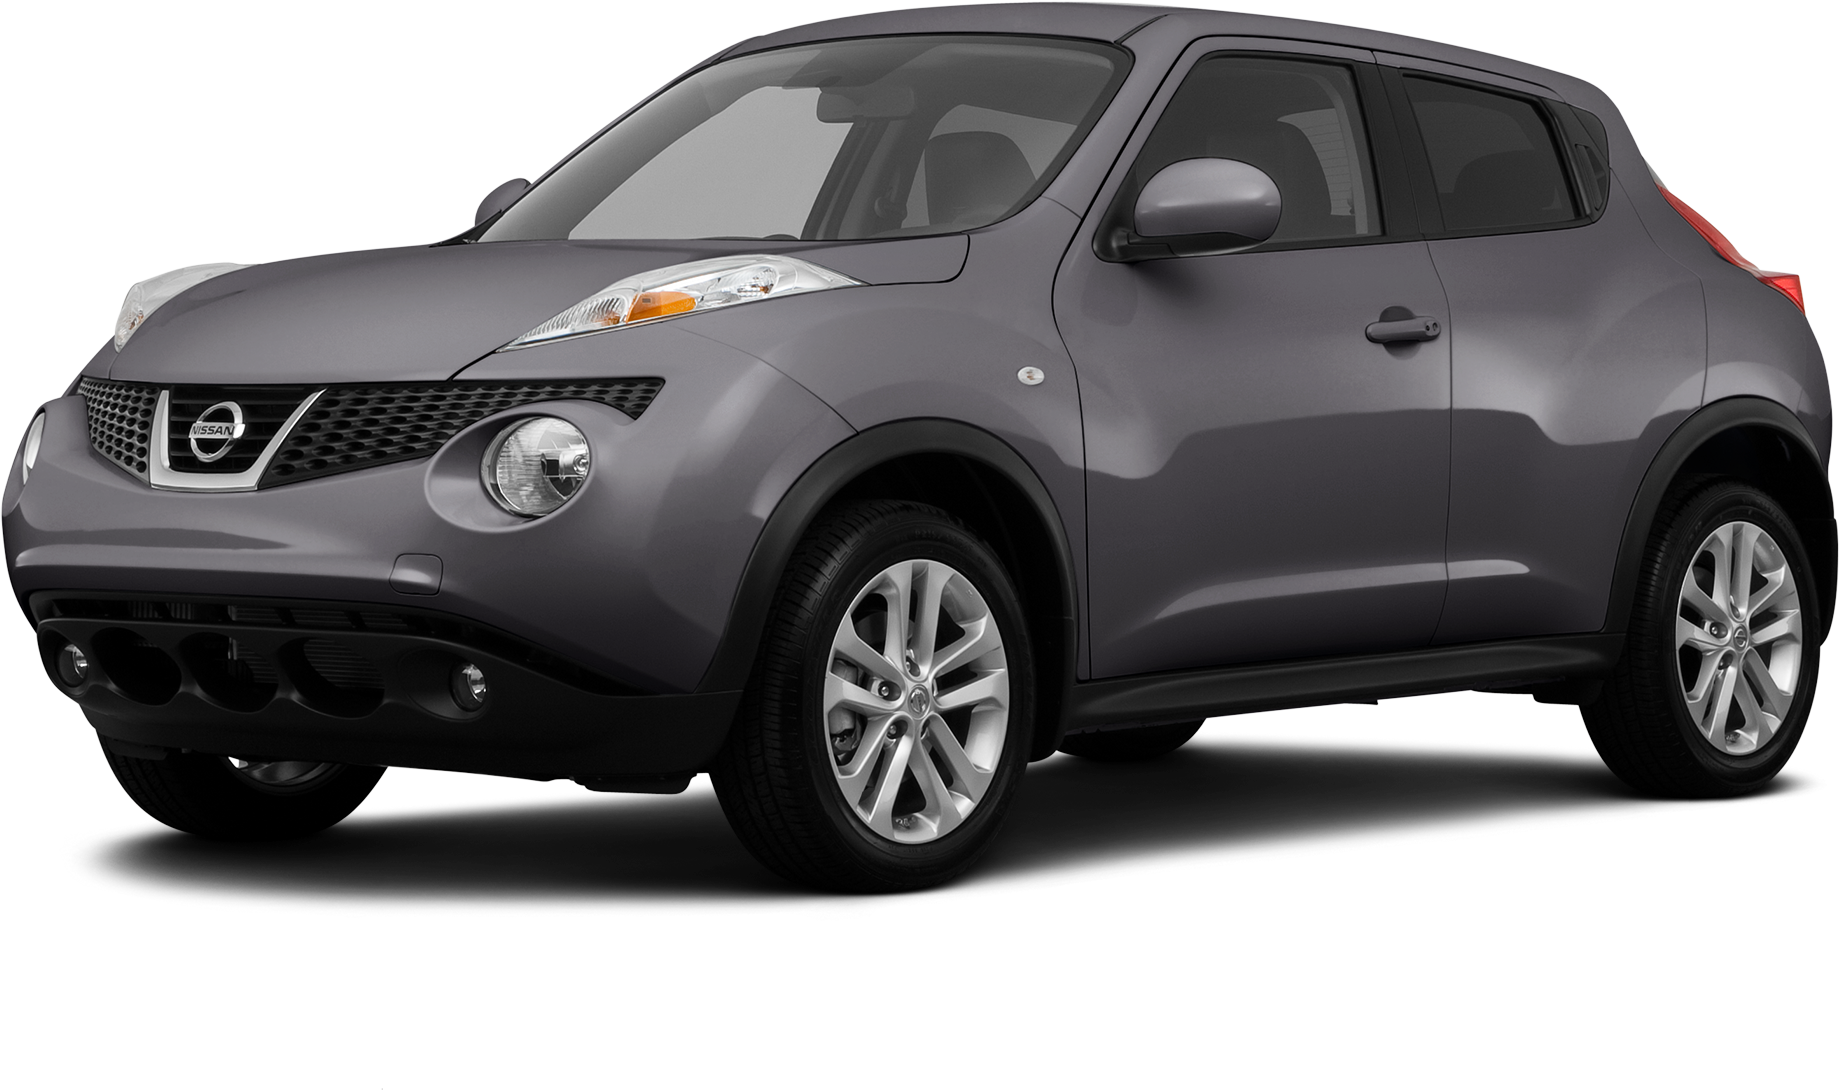 Periodisk barm smidig 2013 Nissan JUKE Values & Cars for Sale | Kelley Blue Book